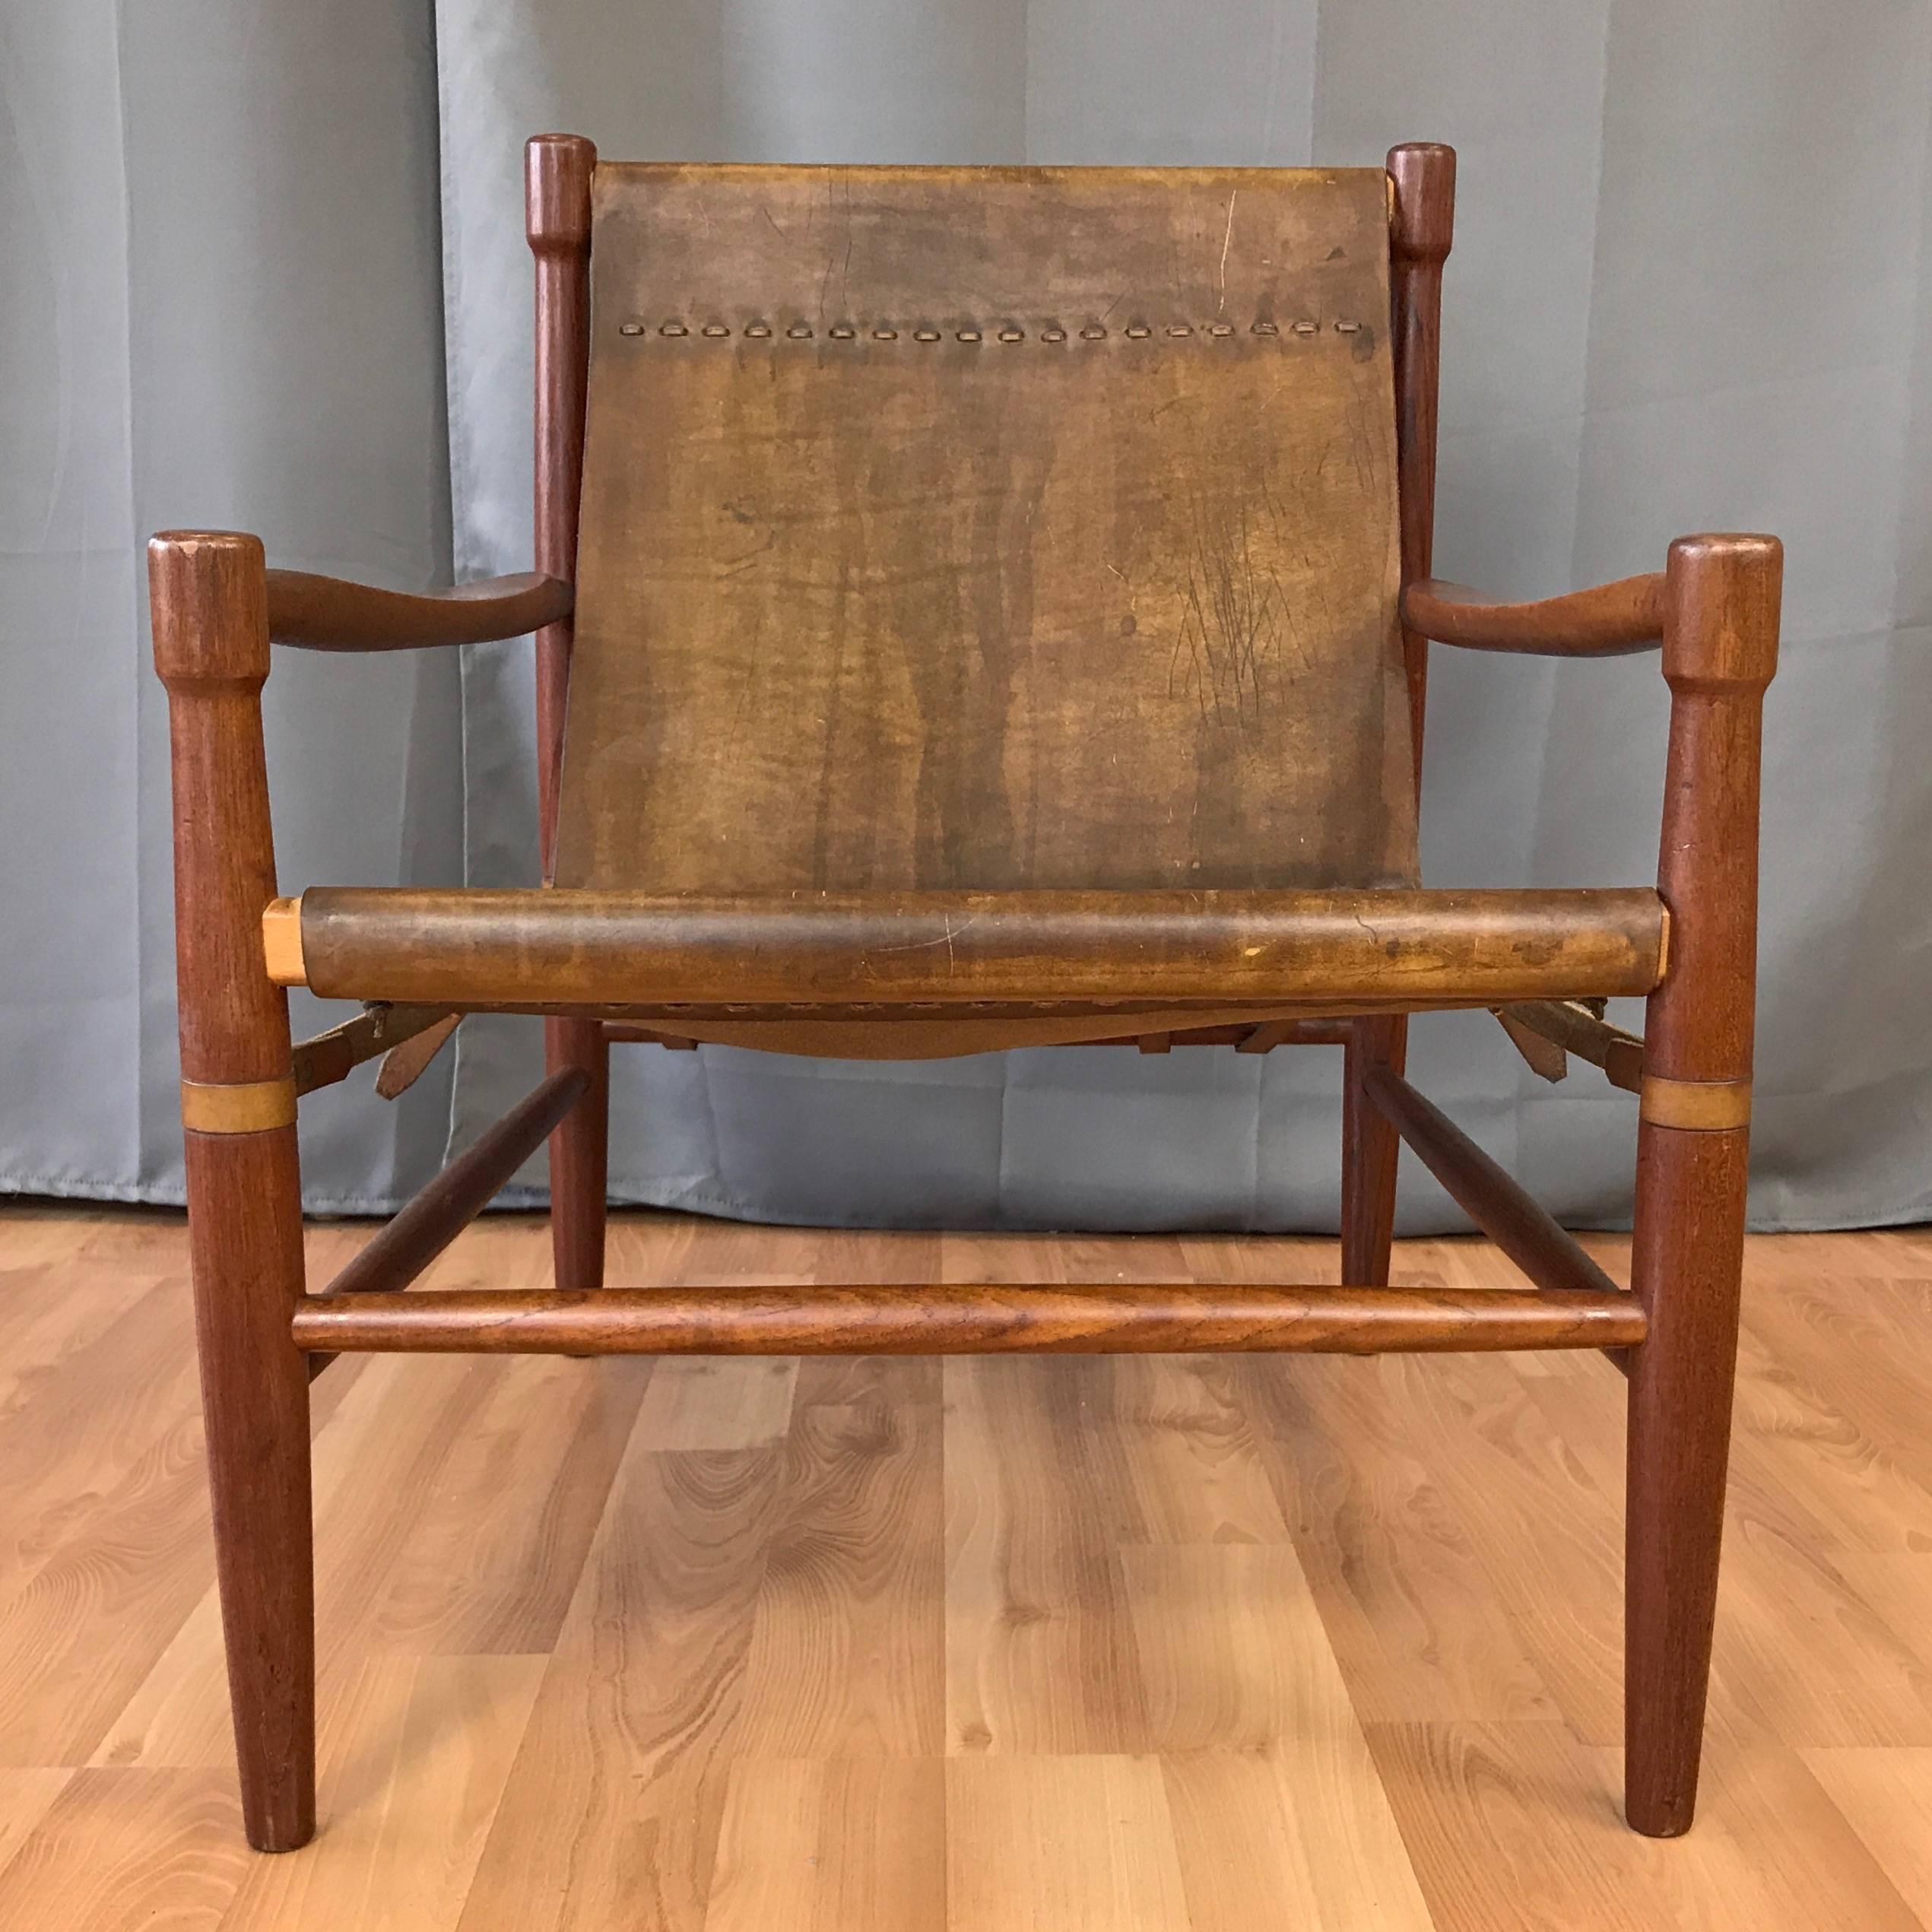 An uncommon Danish teak and leather safari chair in the manner of Kaare Klint, Erik Worts, or Arne Norell.

Solid teak frame with sculpted arms and distinctive drumstick legs. Original dark tan sling seat is a single piece of thick, weathered